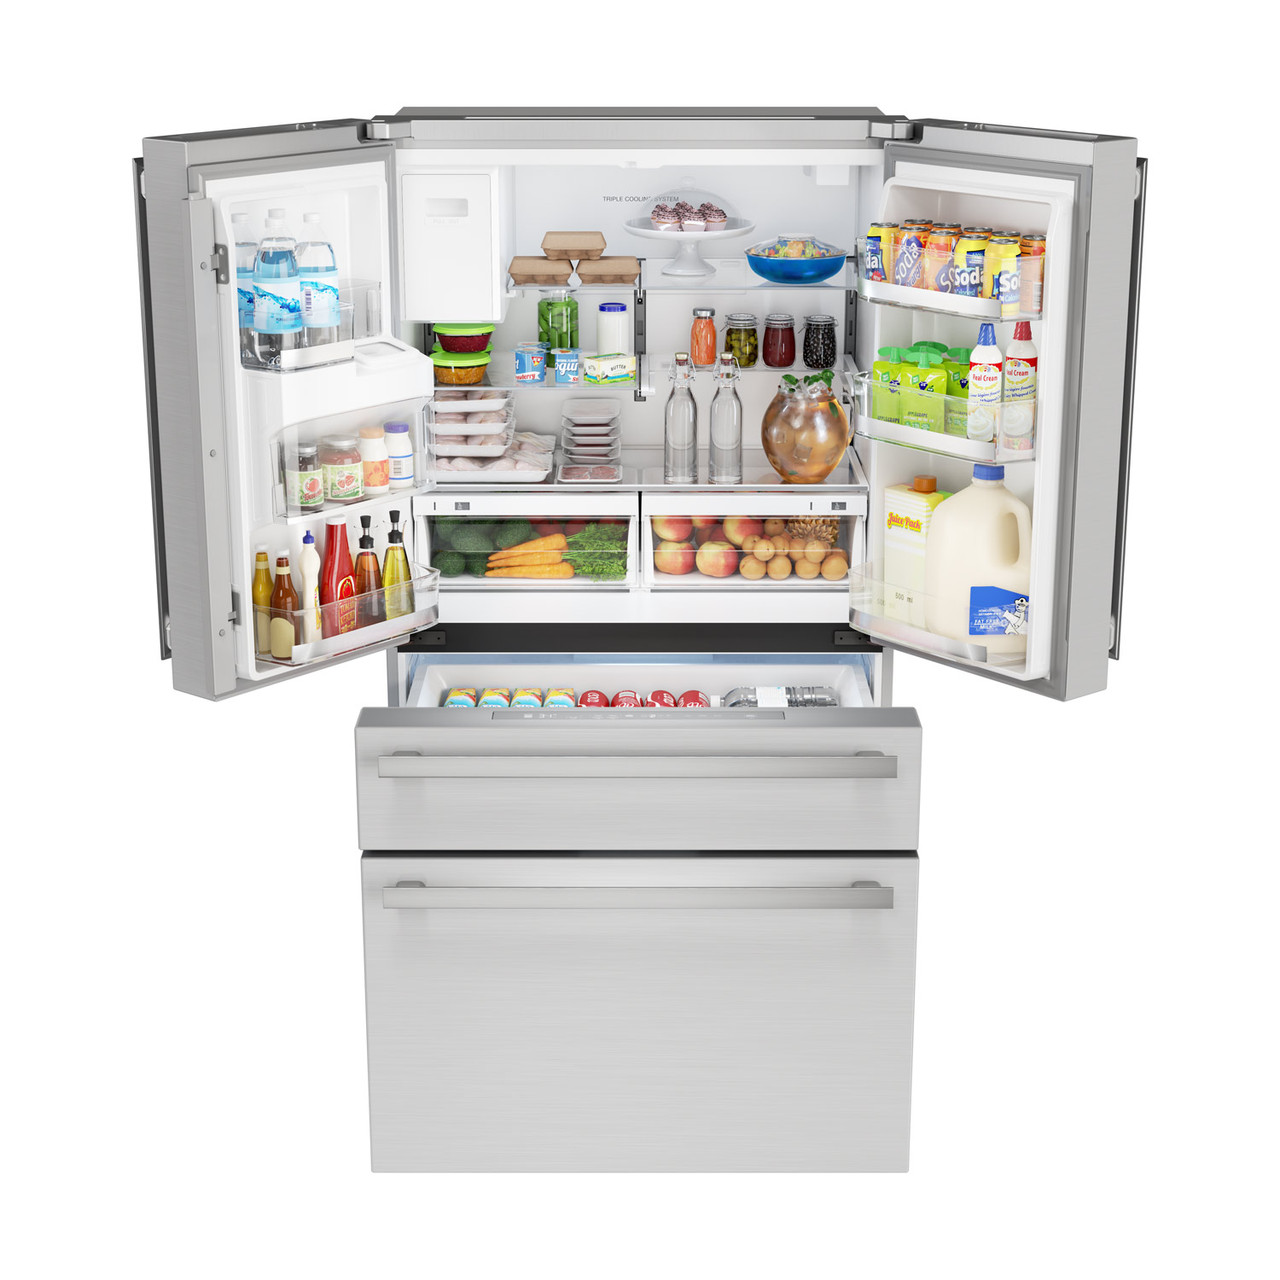 Sharp French 4-Door Counter-Depth Refrigerator with Water Dispenser (SJG2254FS) full view with food